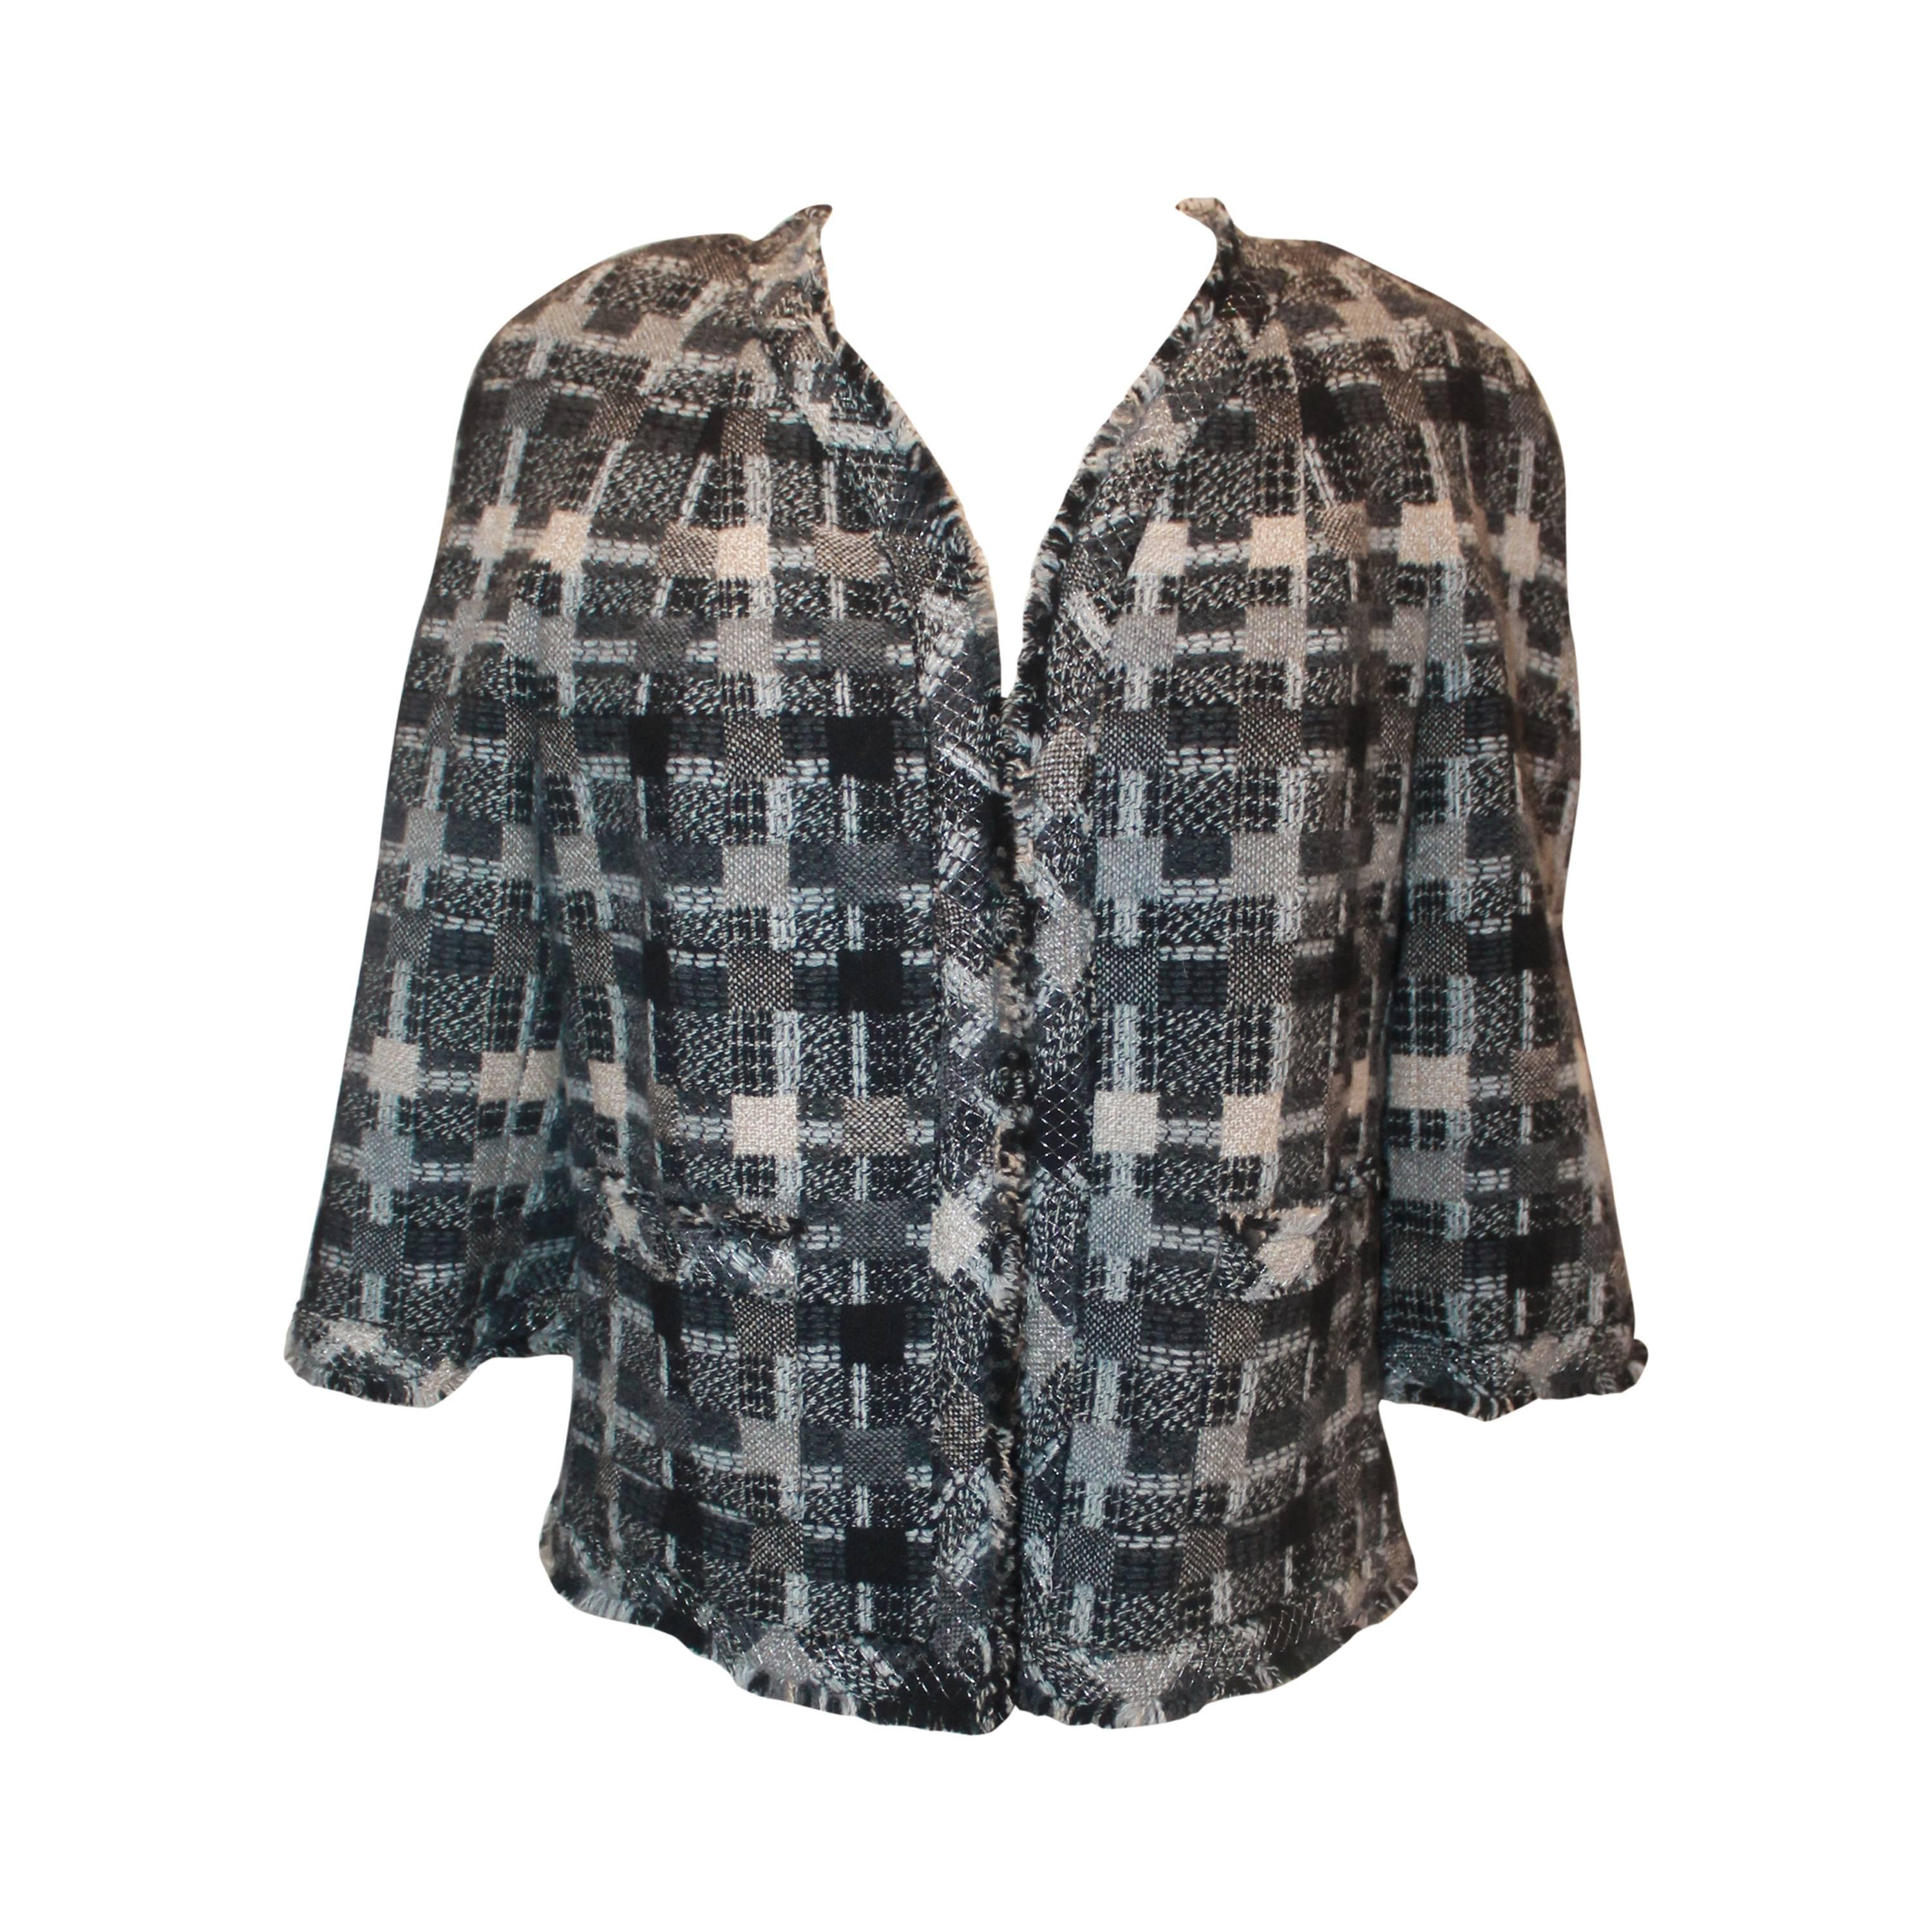 Chanel Vintage Fall 2005 Grey Tone Checkered Patterned 3/4 Sleeve Tweed Short Jacket - Size 42
This beautiful Chanel jacket is from the Fall 2005 Collection and is in excellent vintage condition. The short jacket is open with no front closures, has